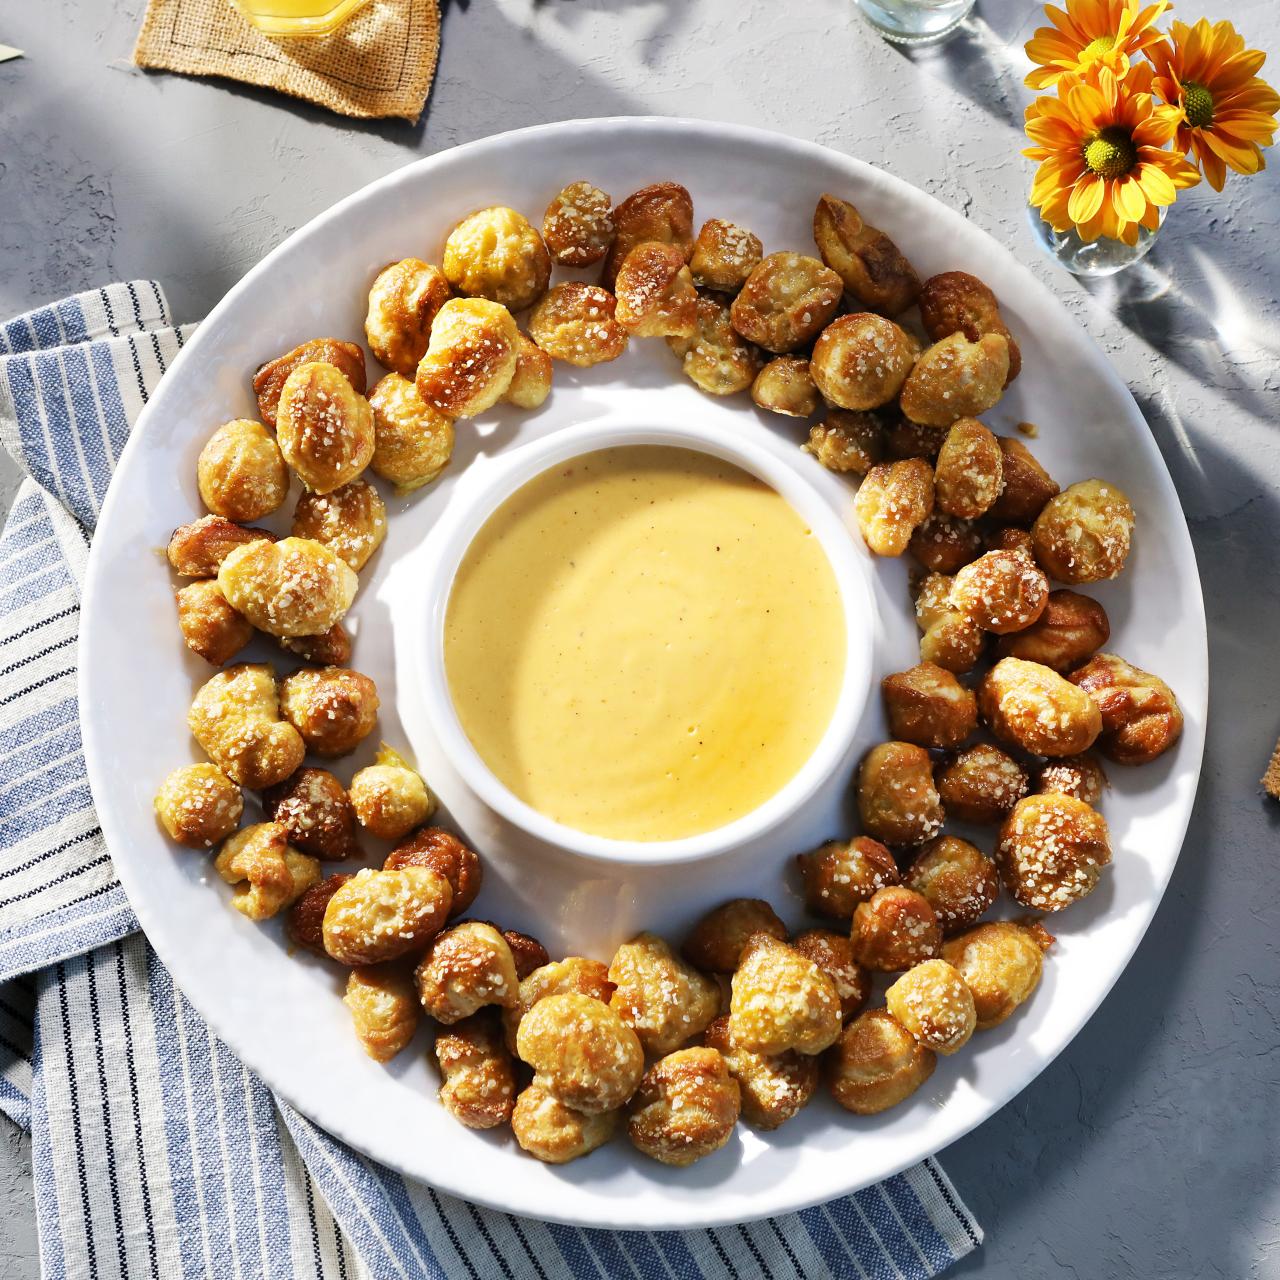 Soft Pretzel Nuggets with Spicy Cheese Dipping Sauce - Brown Eyed